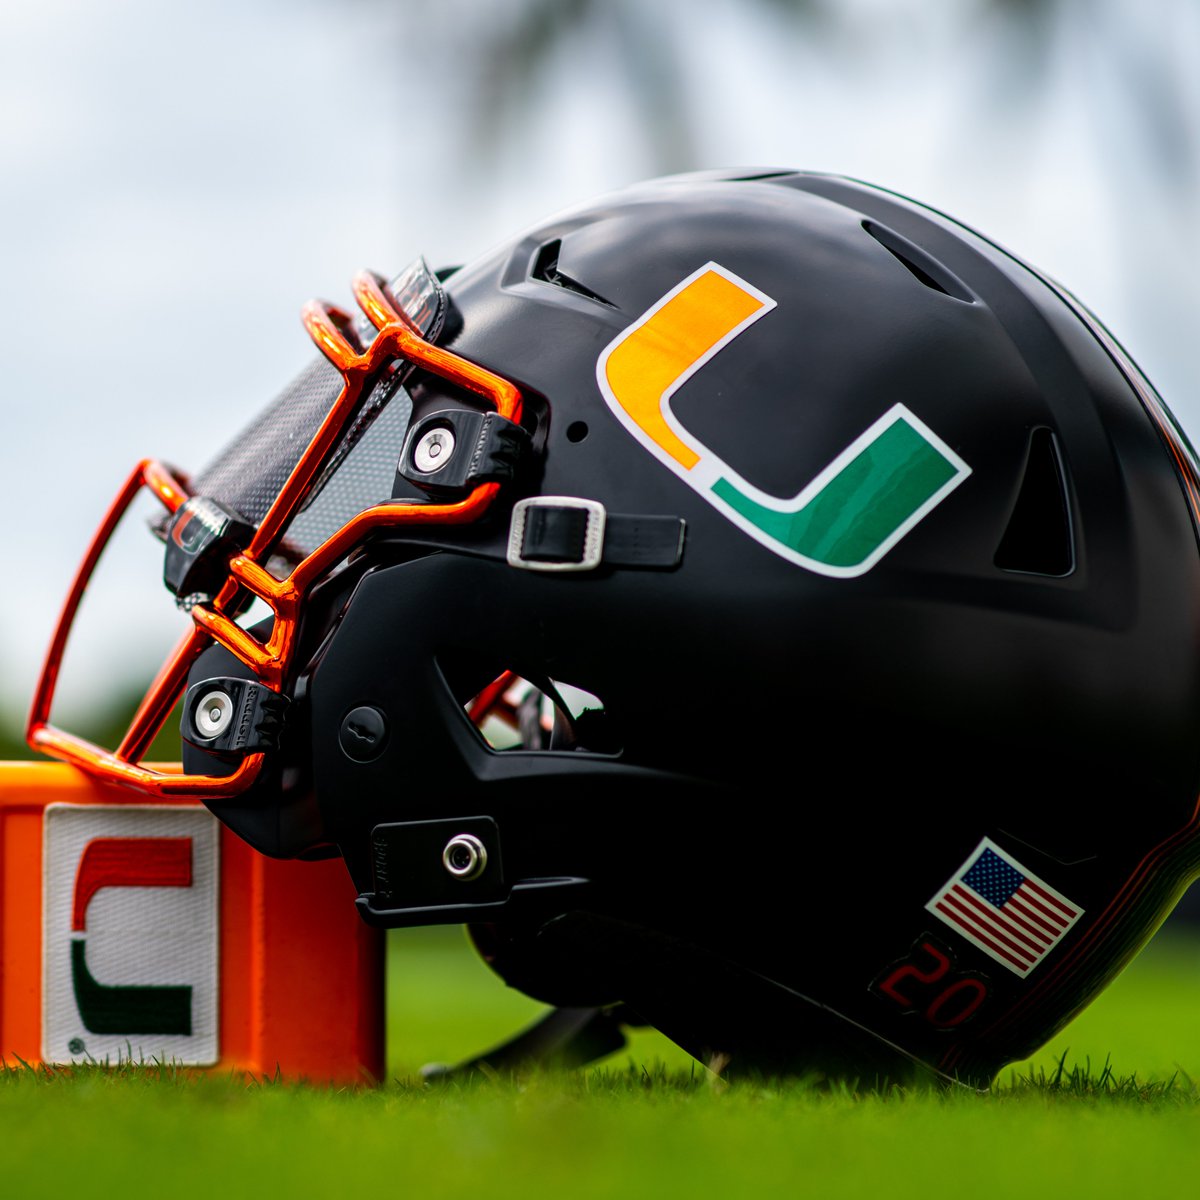 Miami Hurricanes Football on X: A closer look at the new black